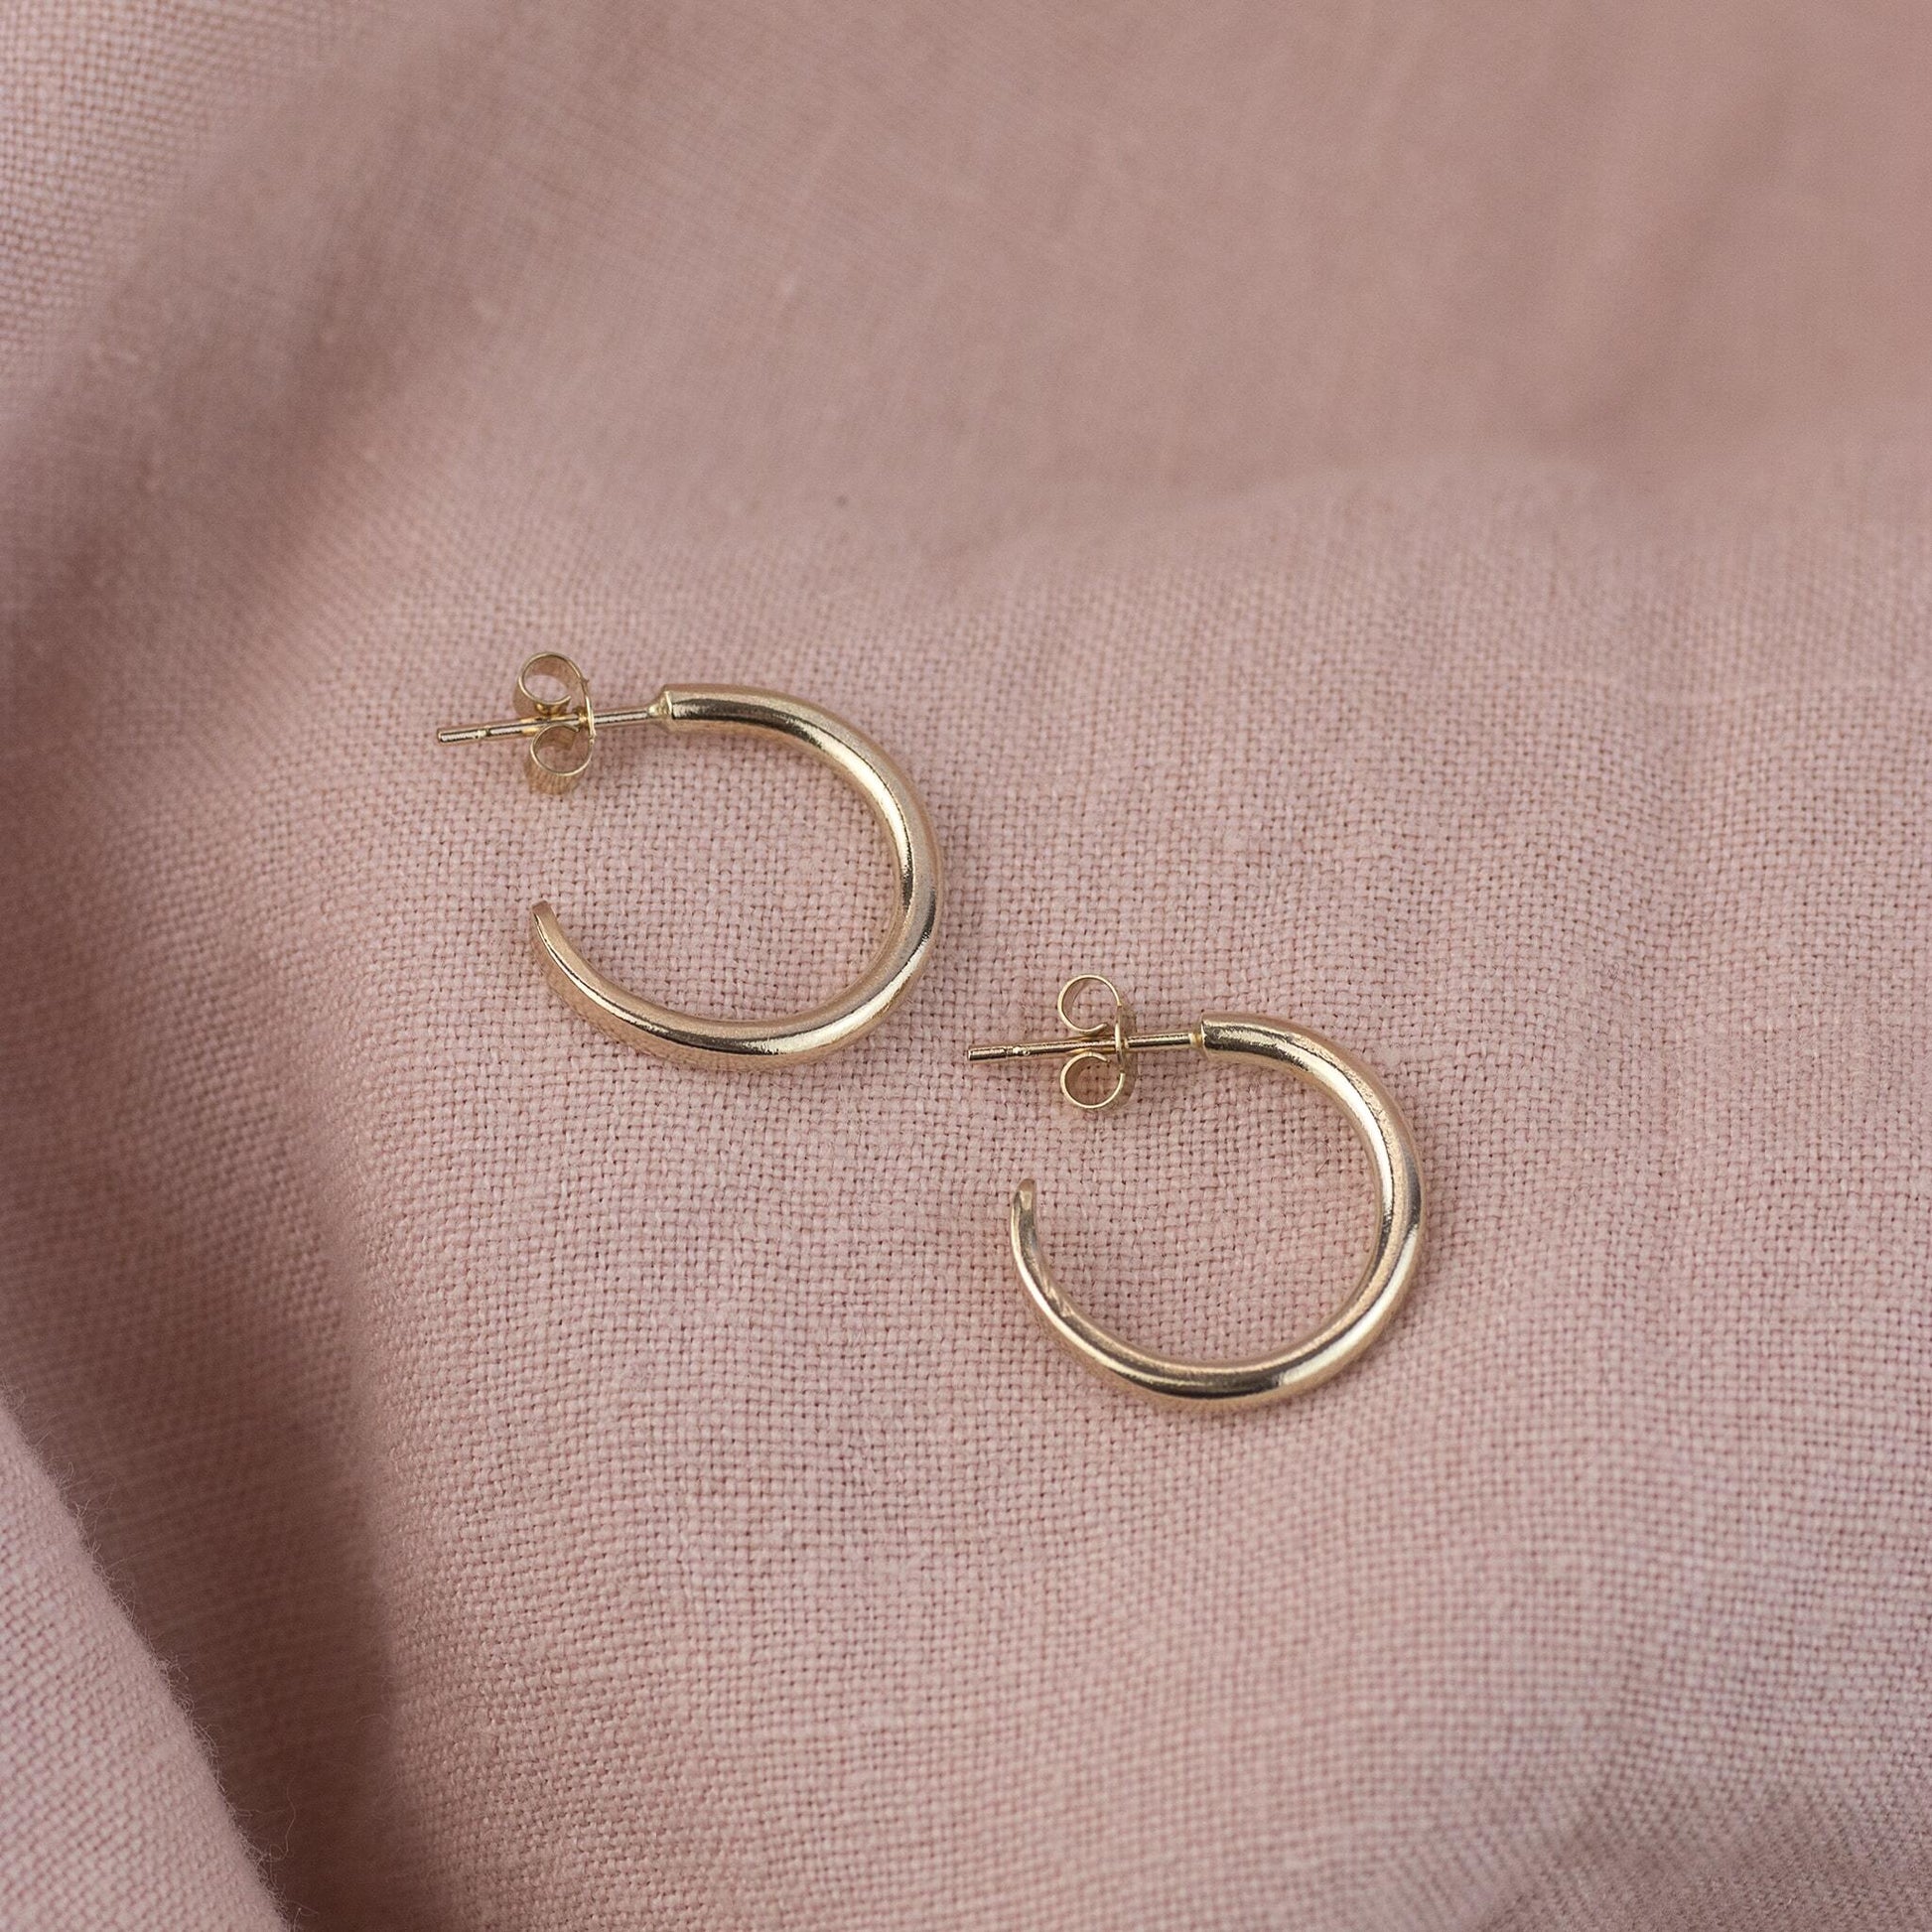 9kt Gold Extra Petite Hoops - 1.5cm